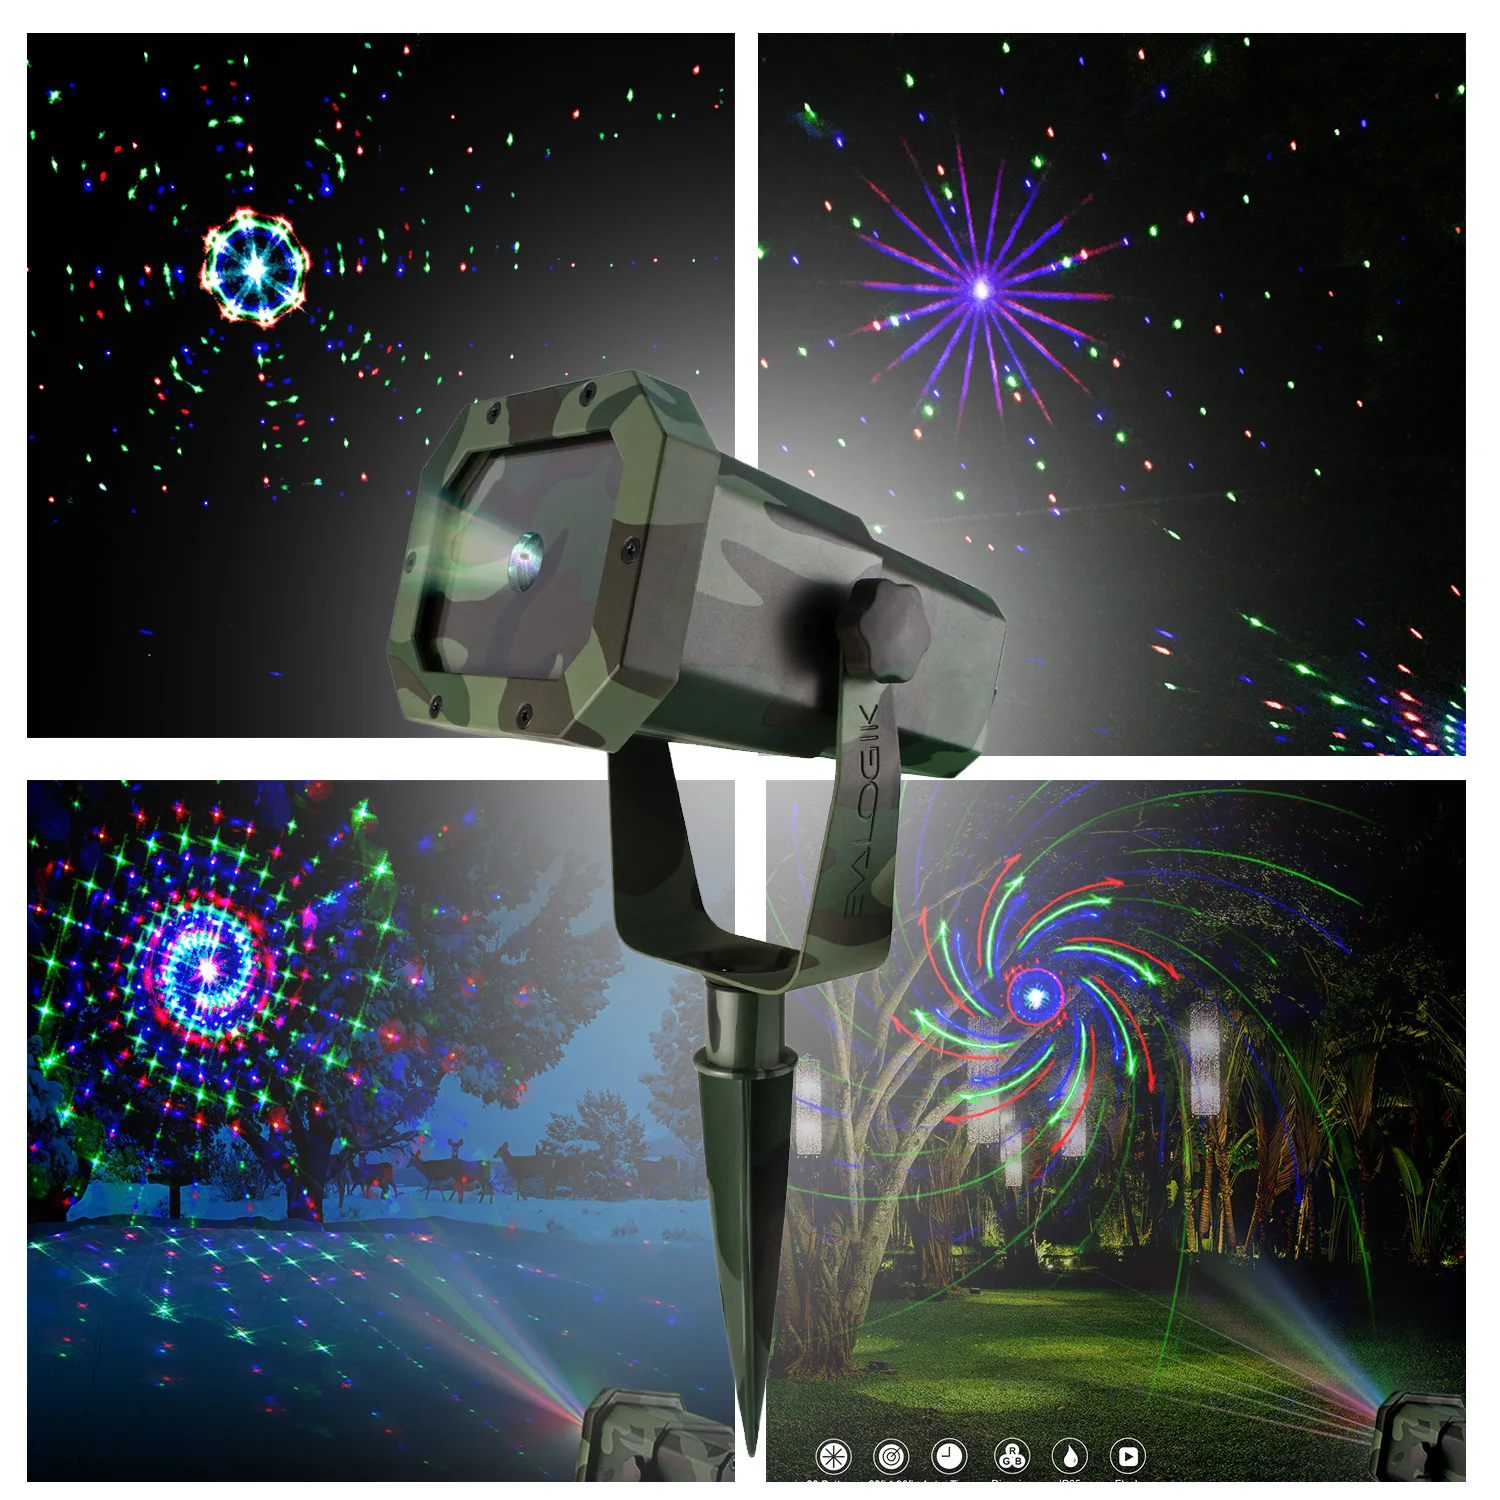 Patio Moving RGB 20 Patterns Party Garden Decoration Yard with RF Remote Control EVA LOGIK Projector Light,Outdoor Waterproof Laser Projector Light Perfect for Lawn